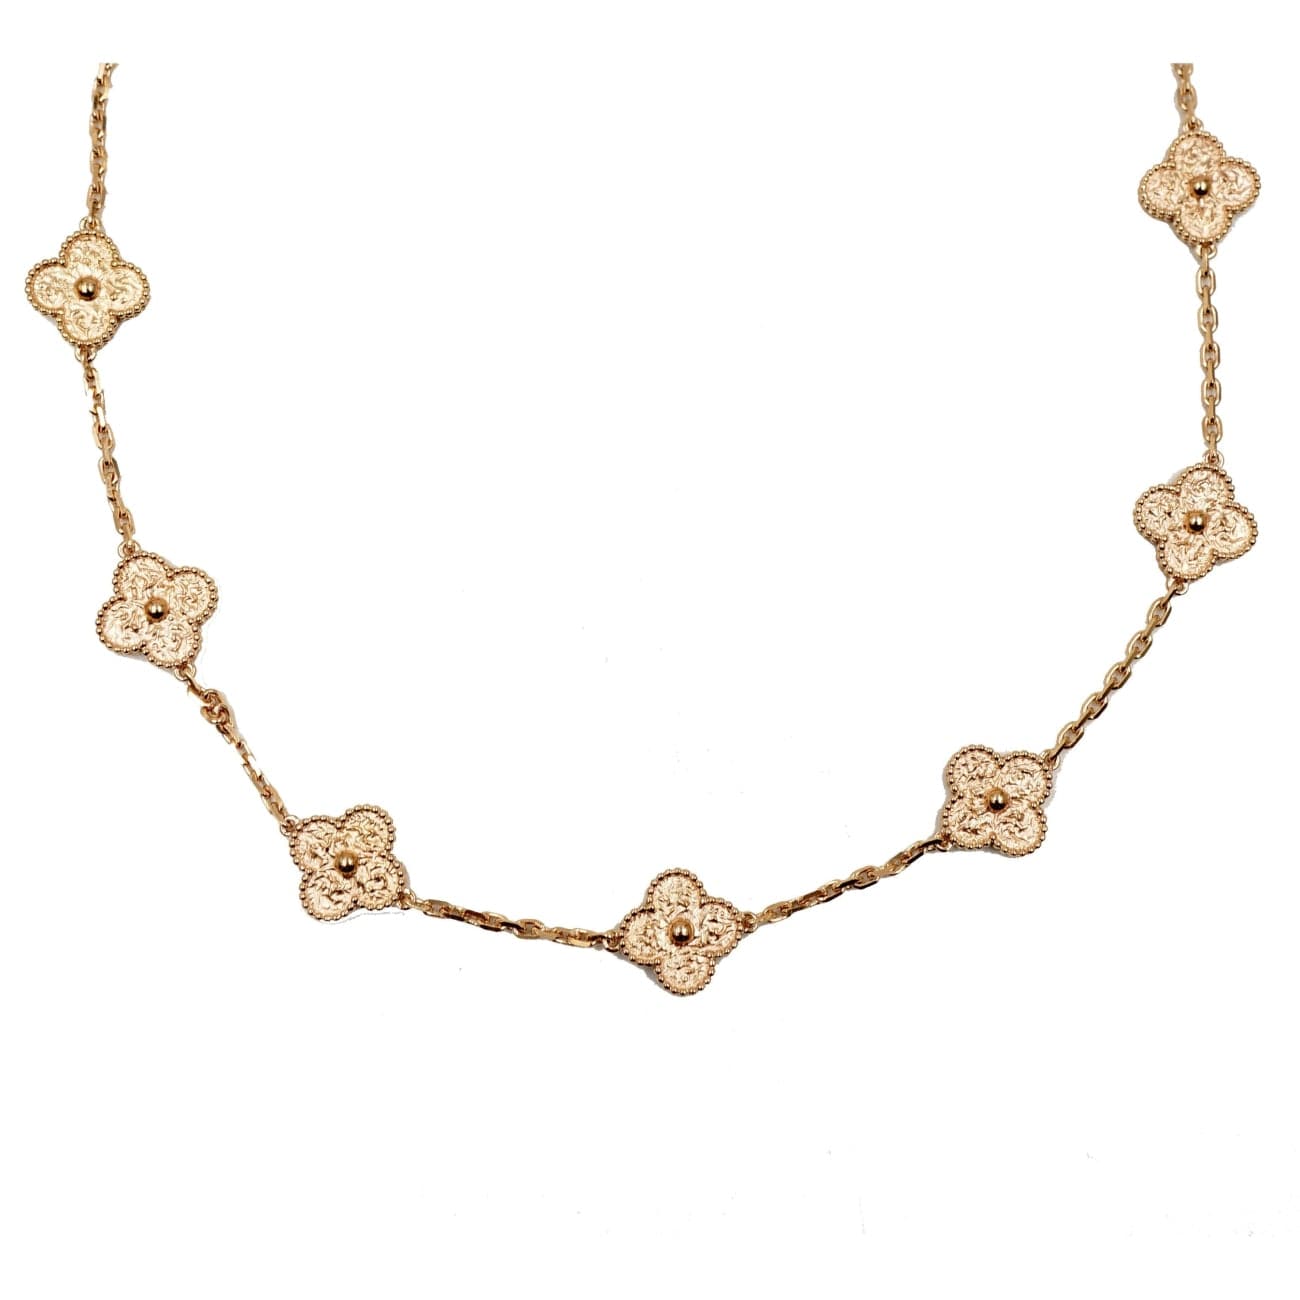 Which Vintage Alhambra necklace to purchase to wear for my wedding